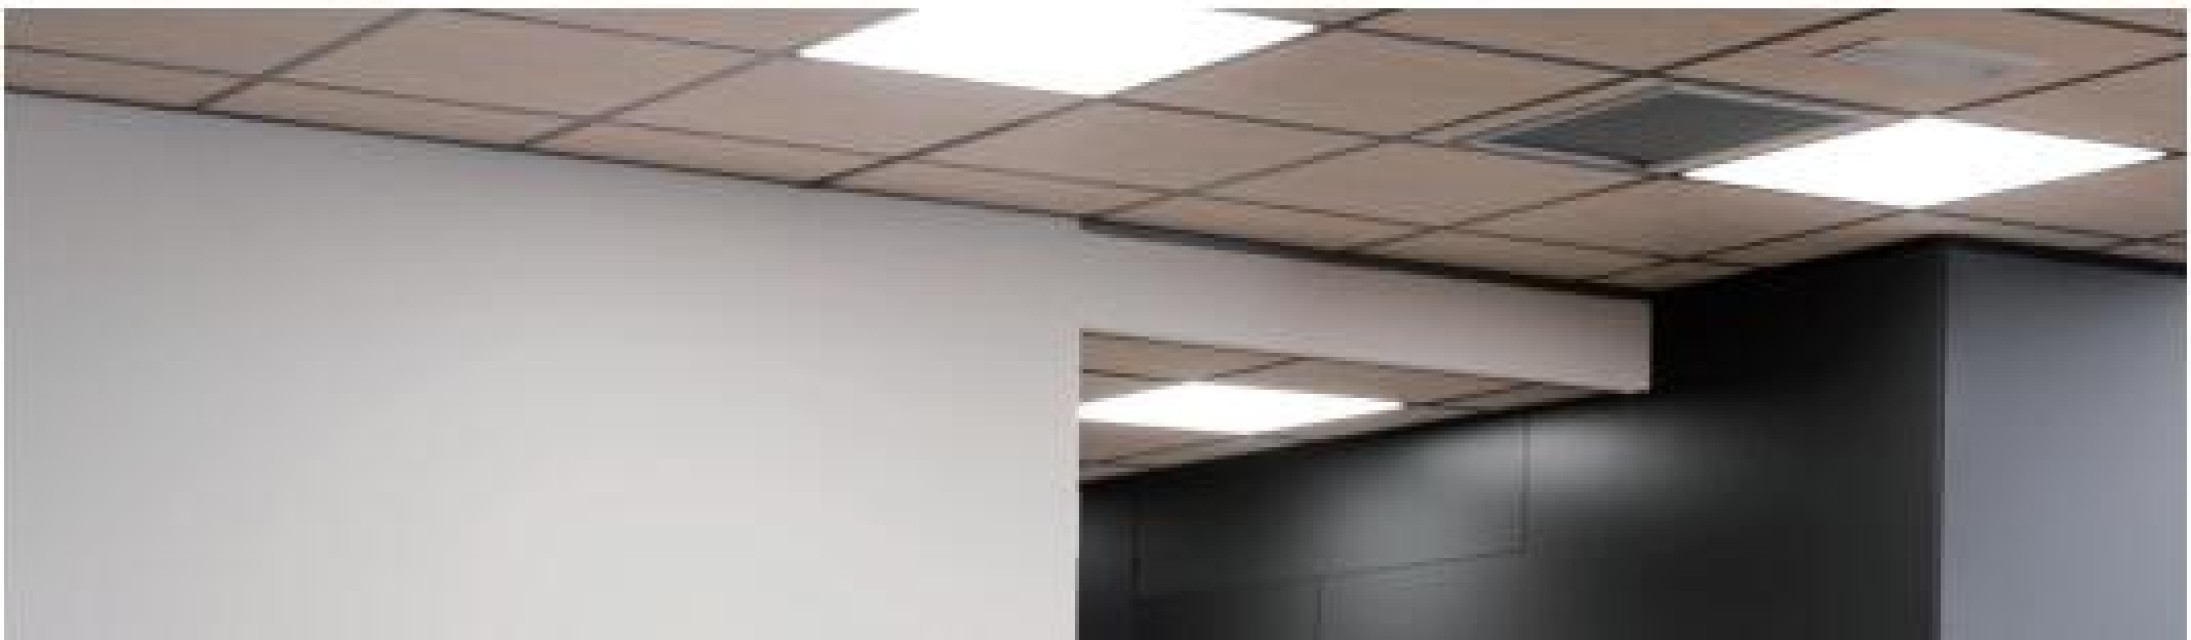 Efficient LED Panel Light - Illuminate Spaces with Excellence